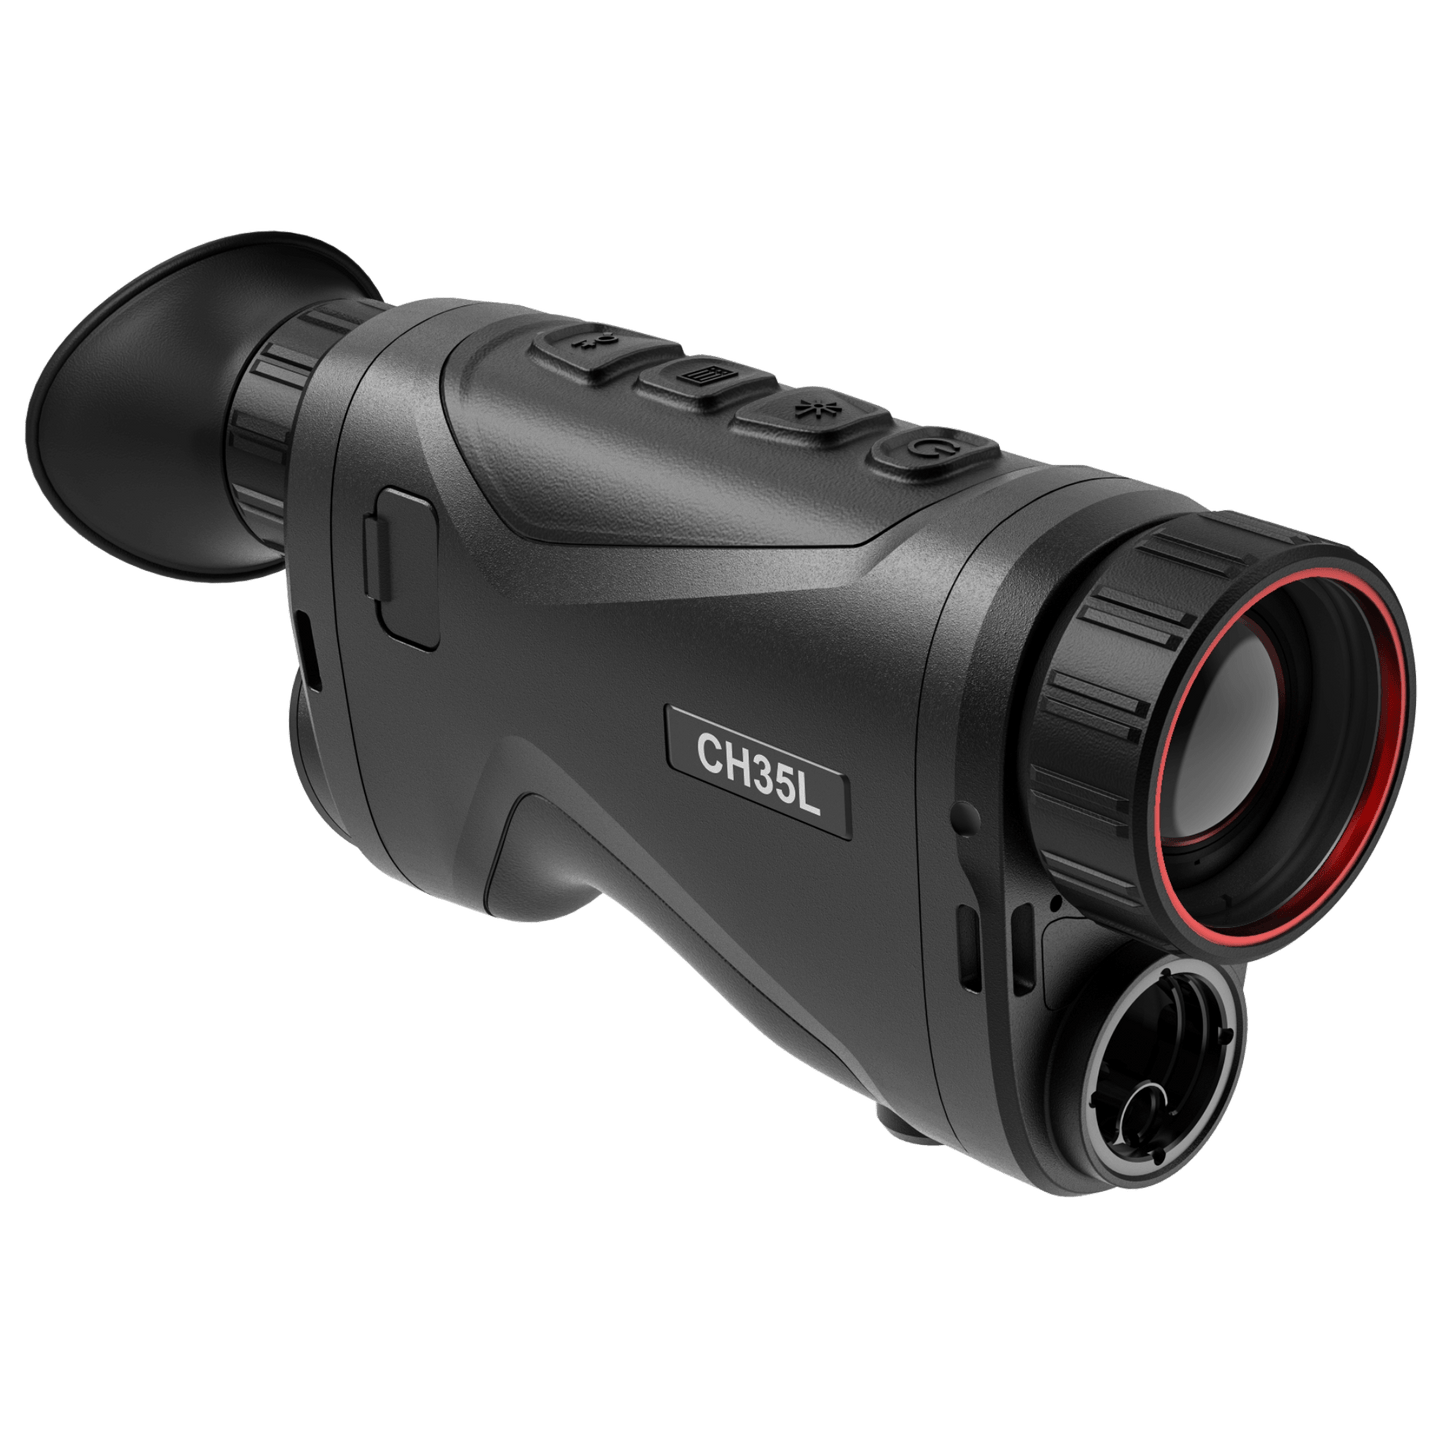 Side angle view of HikMicro Condor CH35L Thermal Monocular, displaying model label and control buttons. Premium thermal imaging for hunting, security, and outdoor activities.